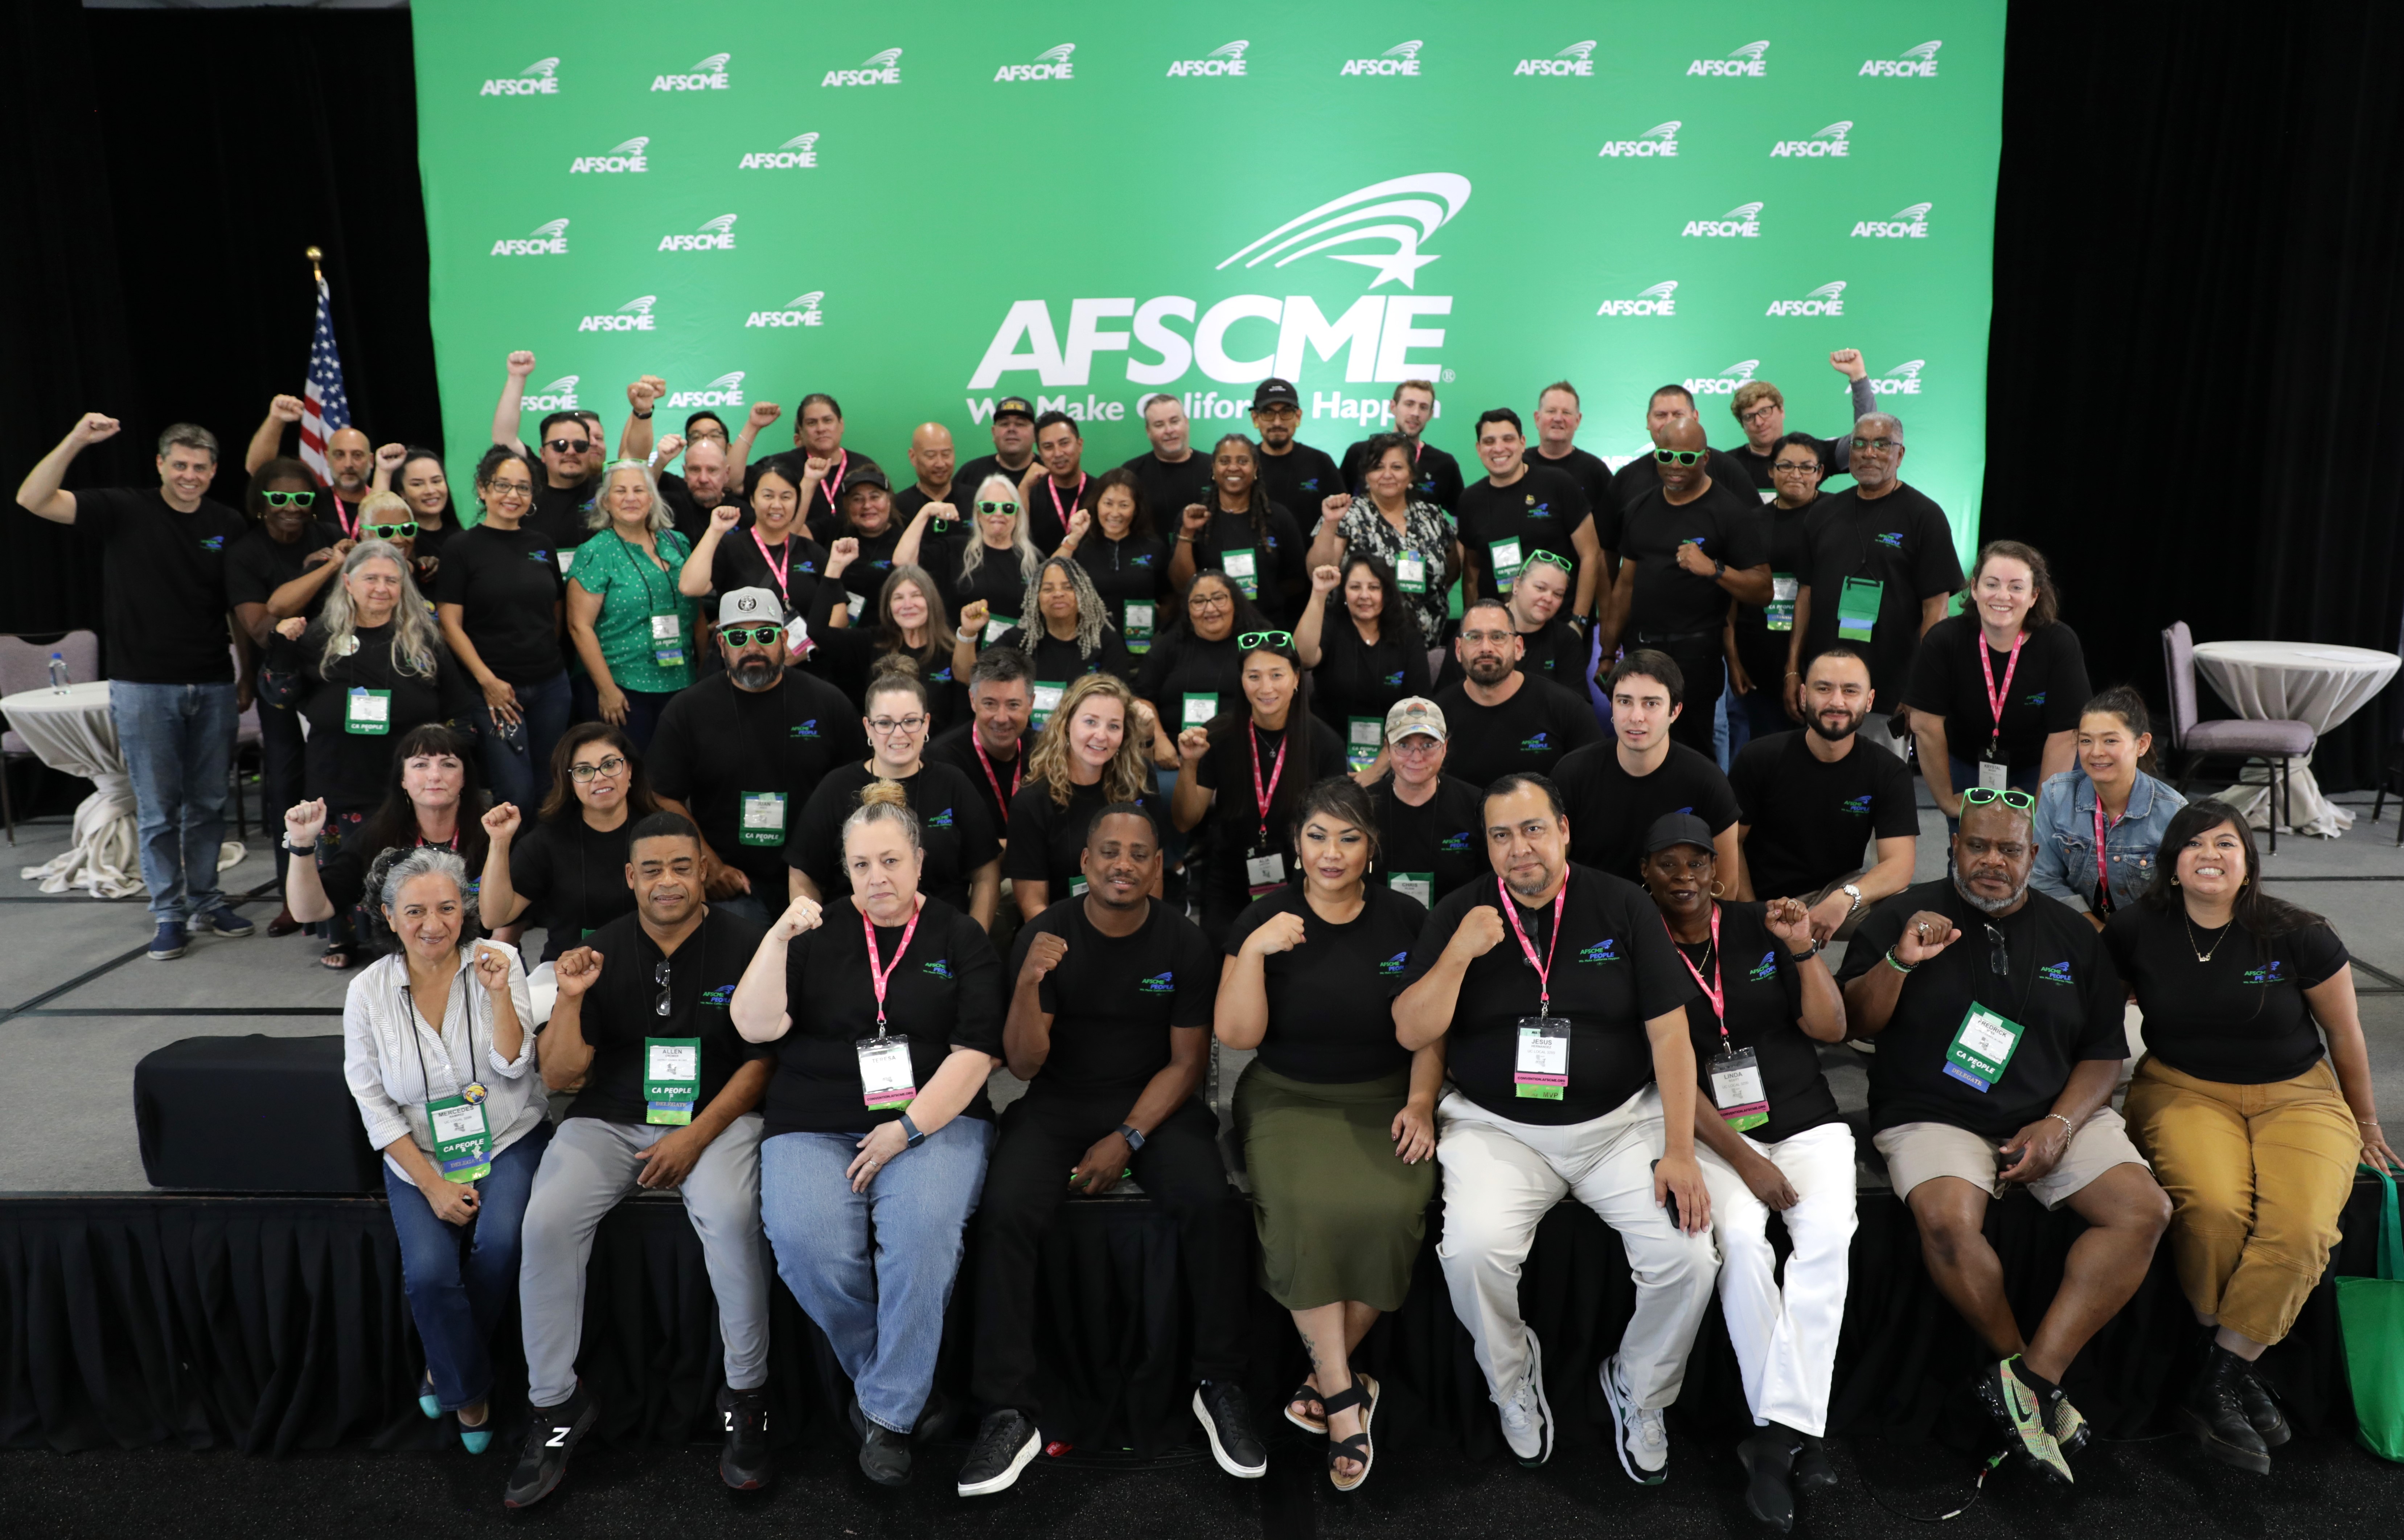 At AFSCME forum, CA Senate candidates affirm support for unions, workers’ rights